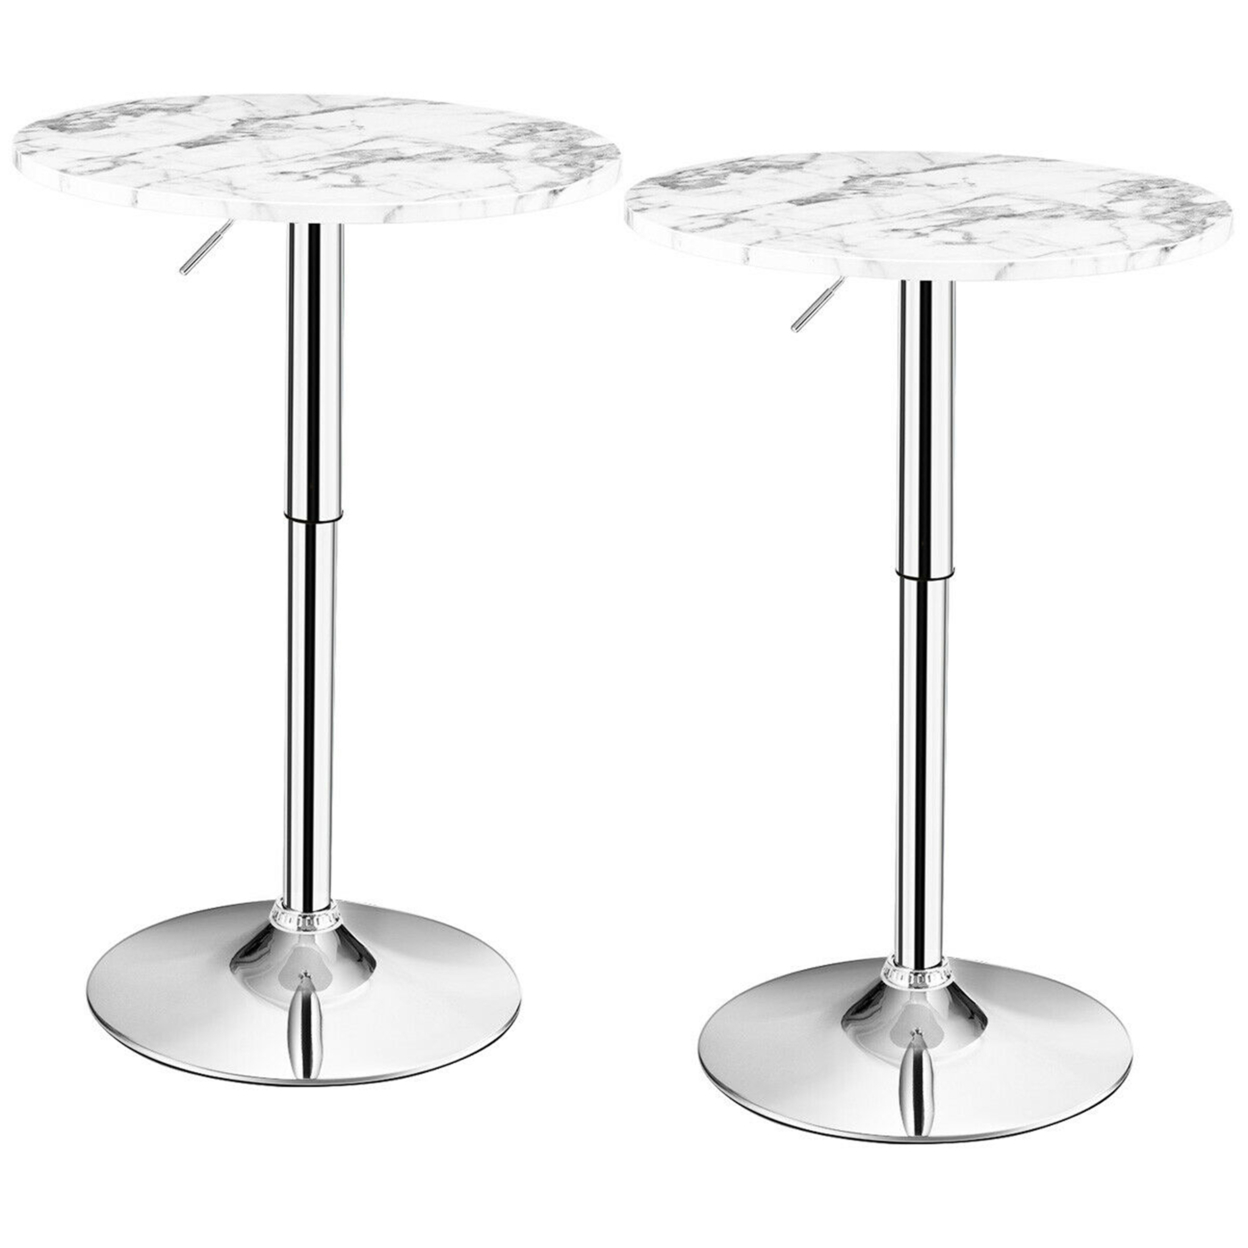 Set Of 2 Round Pub Bar Table Height Adjustable 360-degree Swivel W/ Faux Marble Top